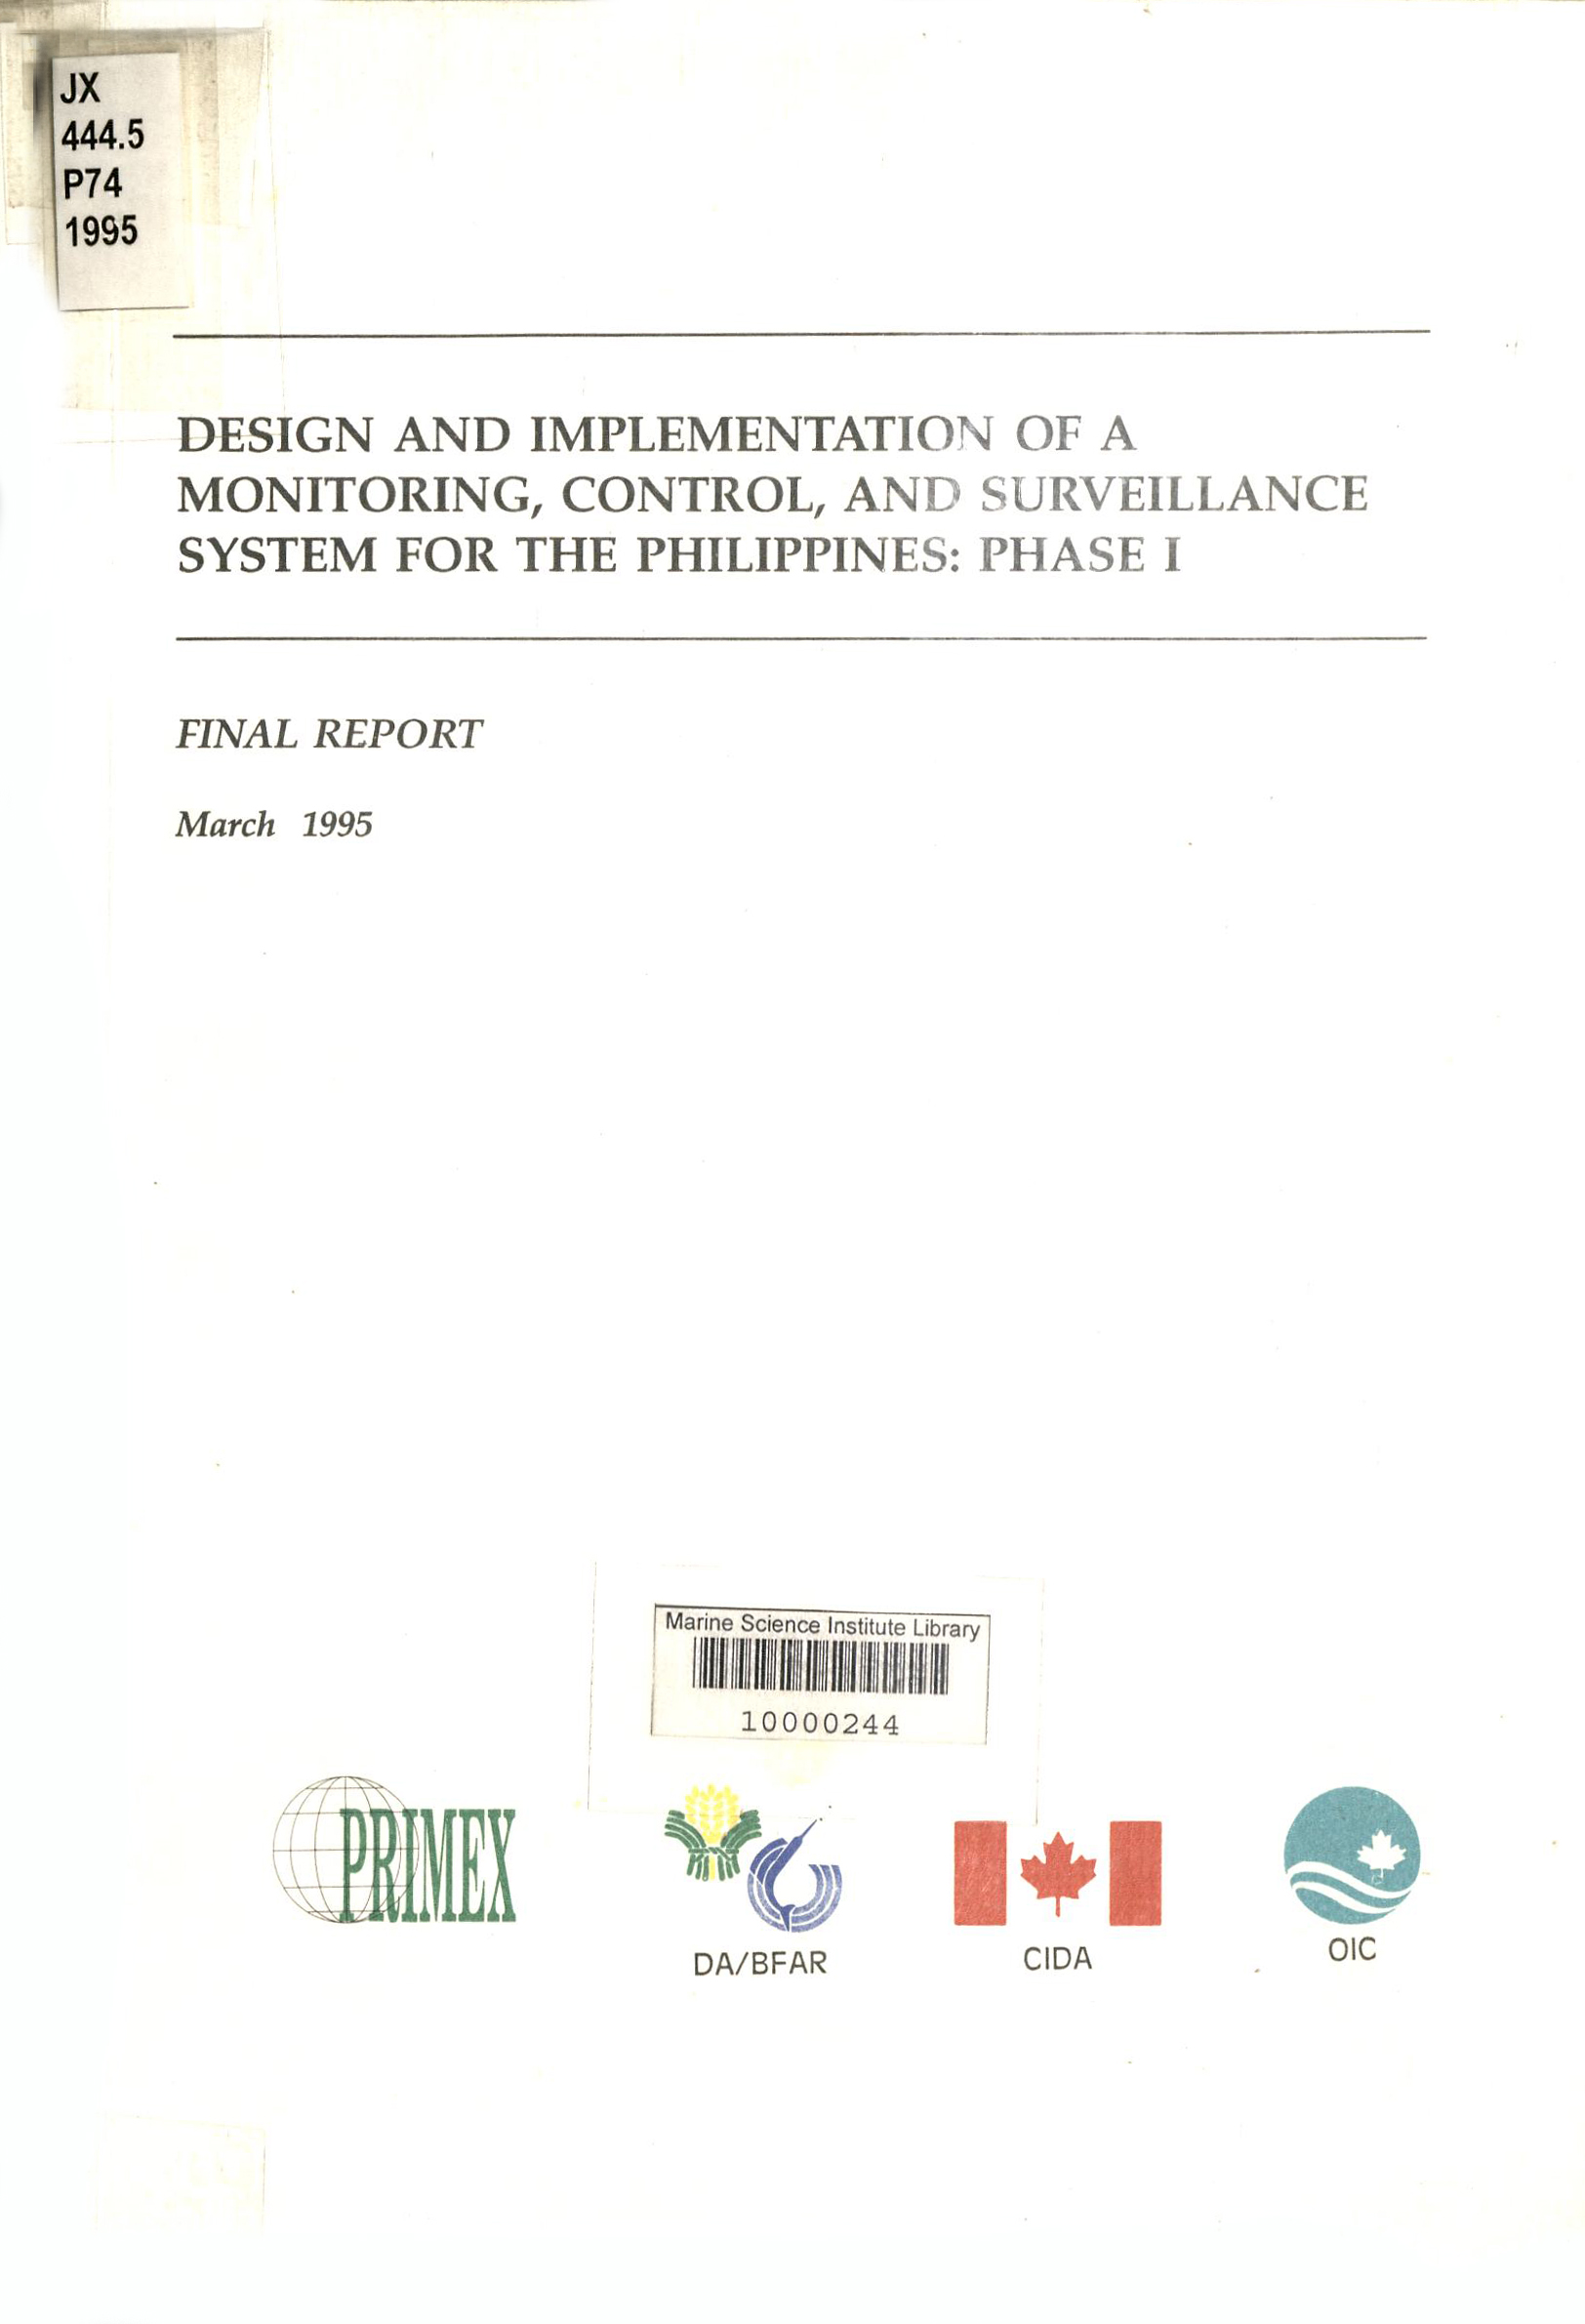 Design and implementation of a monitoring, control and surveillance system for the Philippines Phase I. Final Report, March 1995.